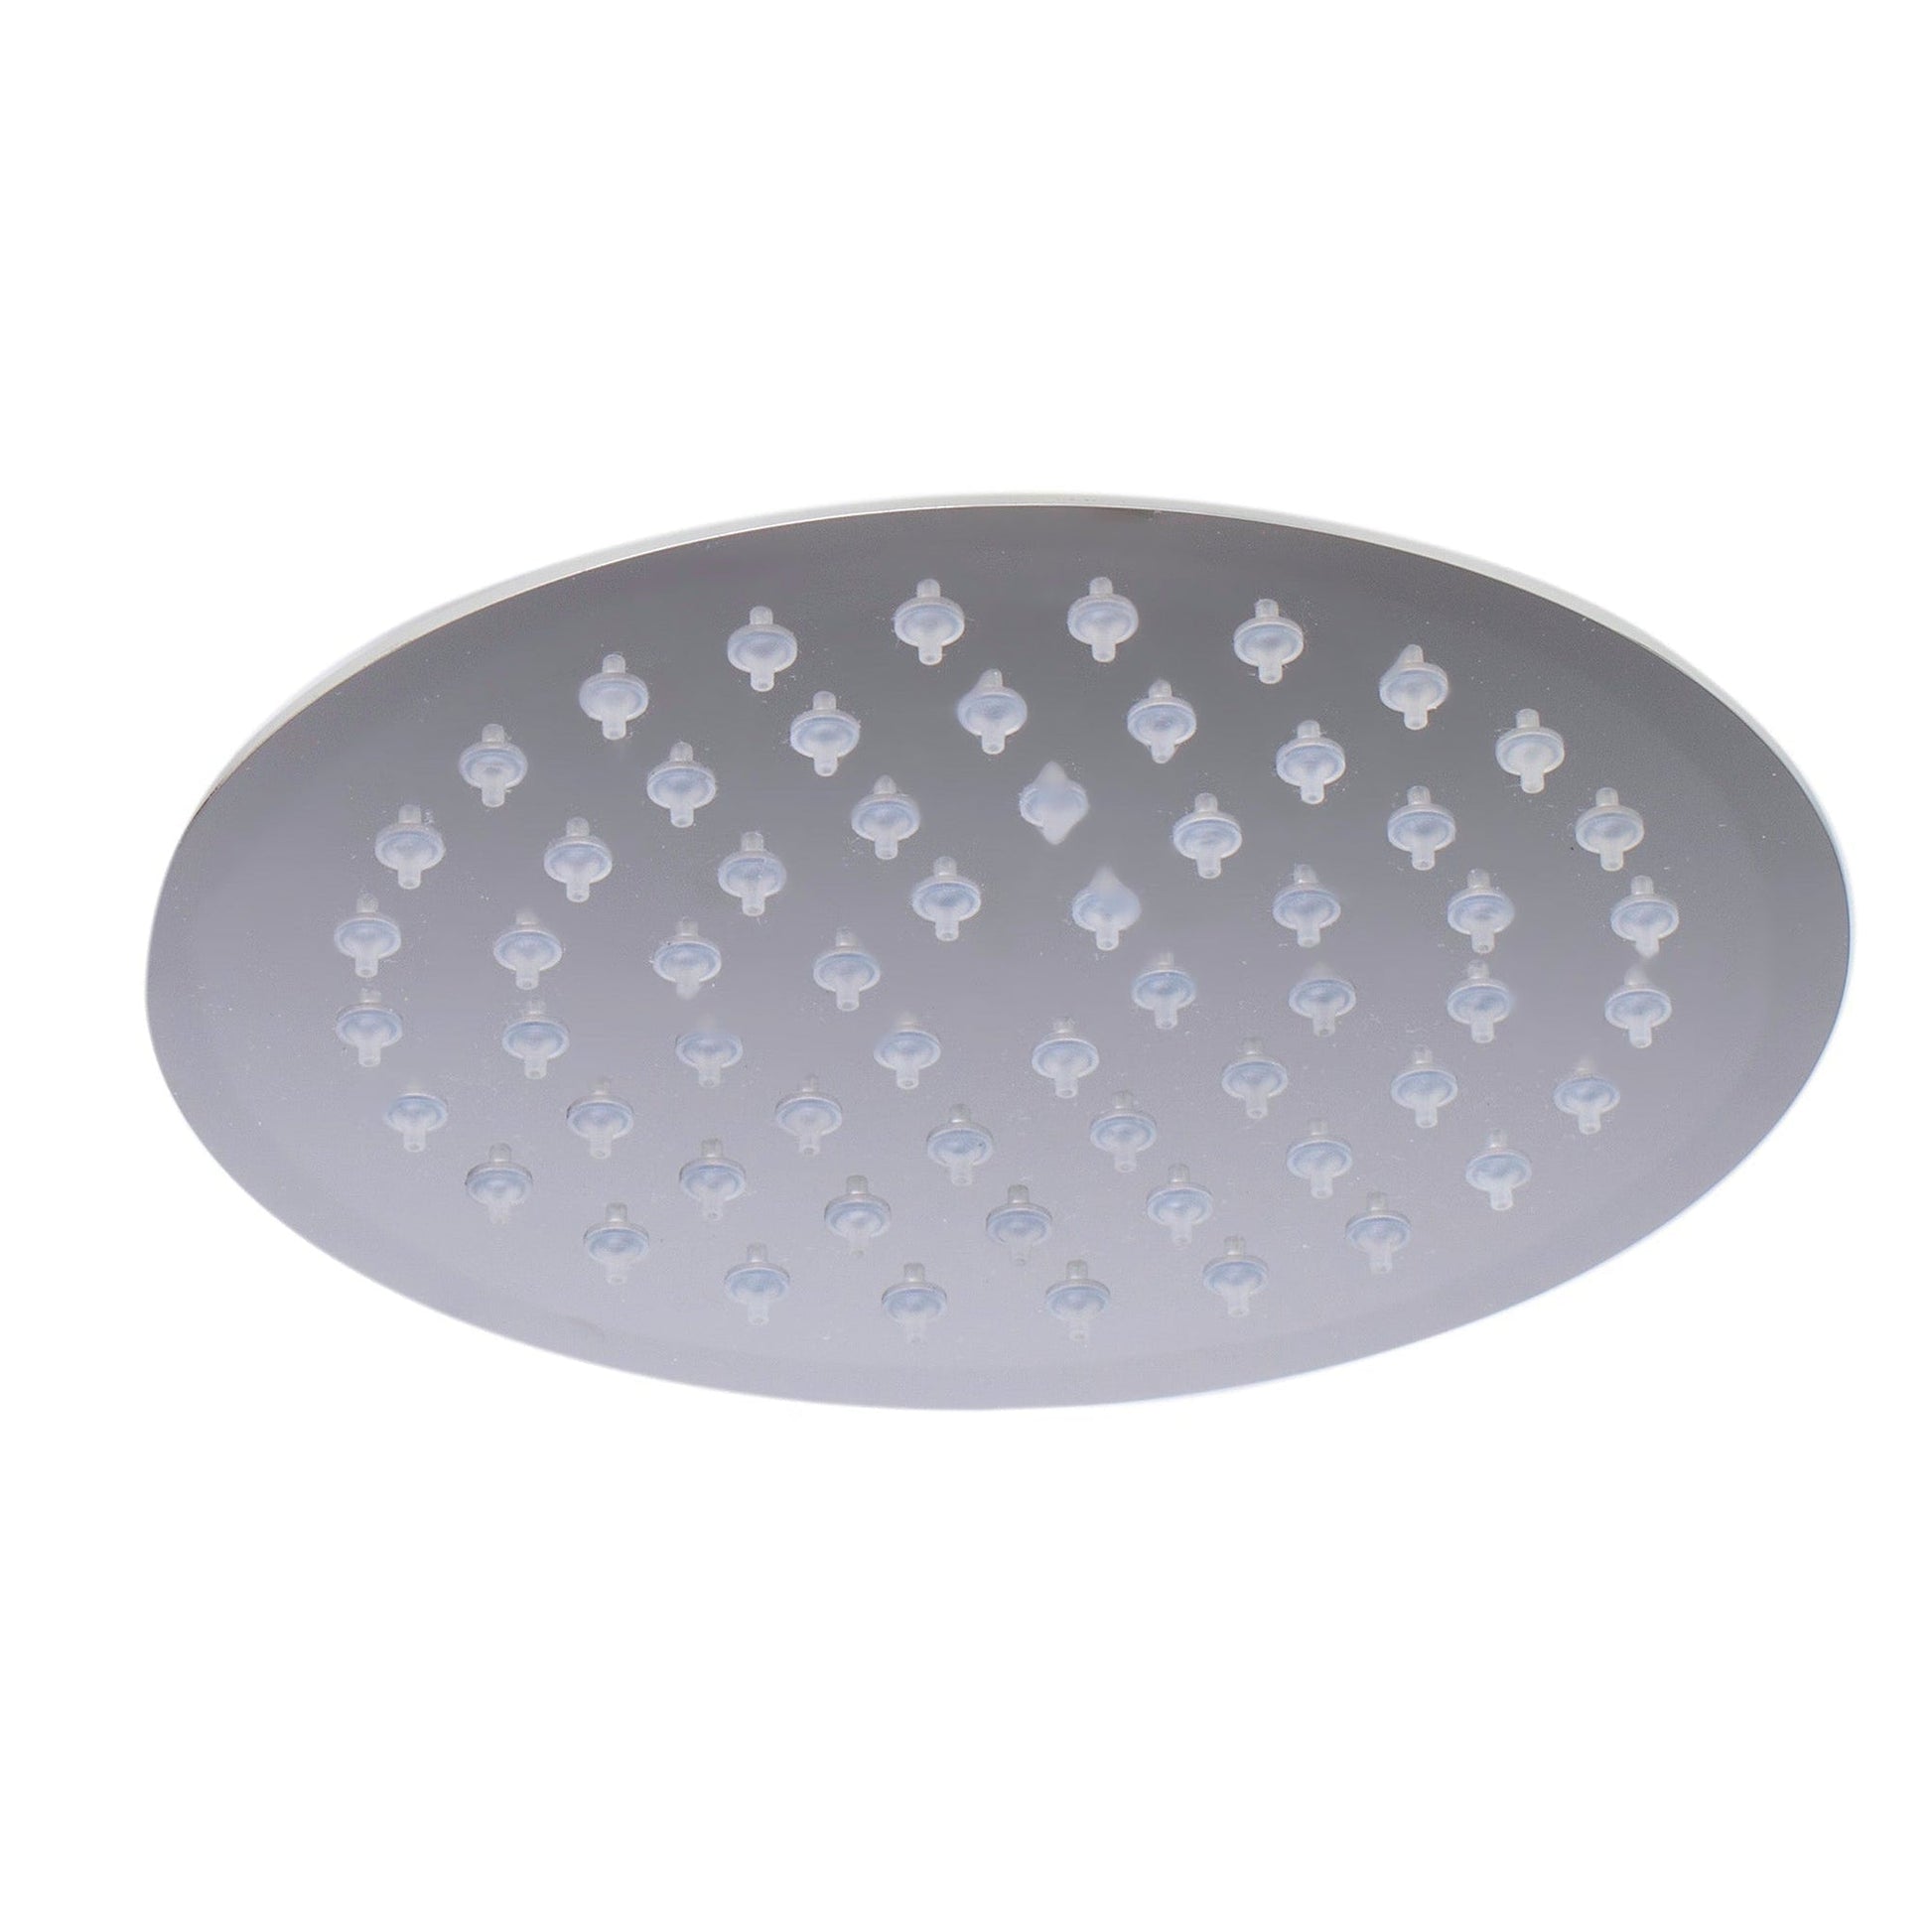 ALFI Brand RAIN8R-PSS 8" Round Solid Polished Stainless Steel Wall or Ceiling Mounted Ultra Thin Rain Brass Shower Head